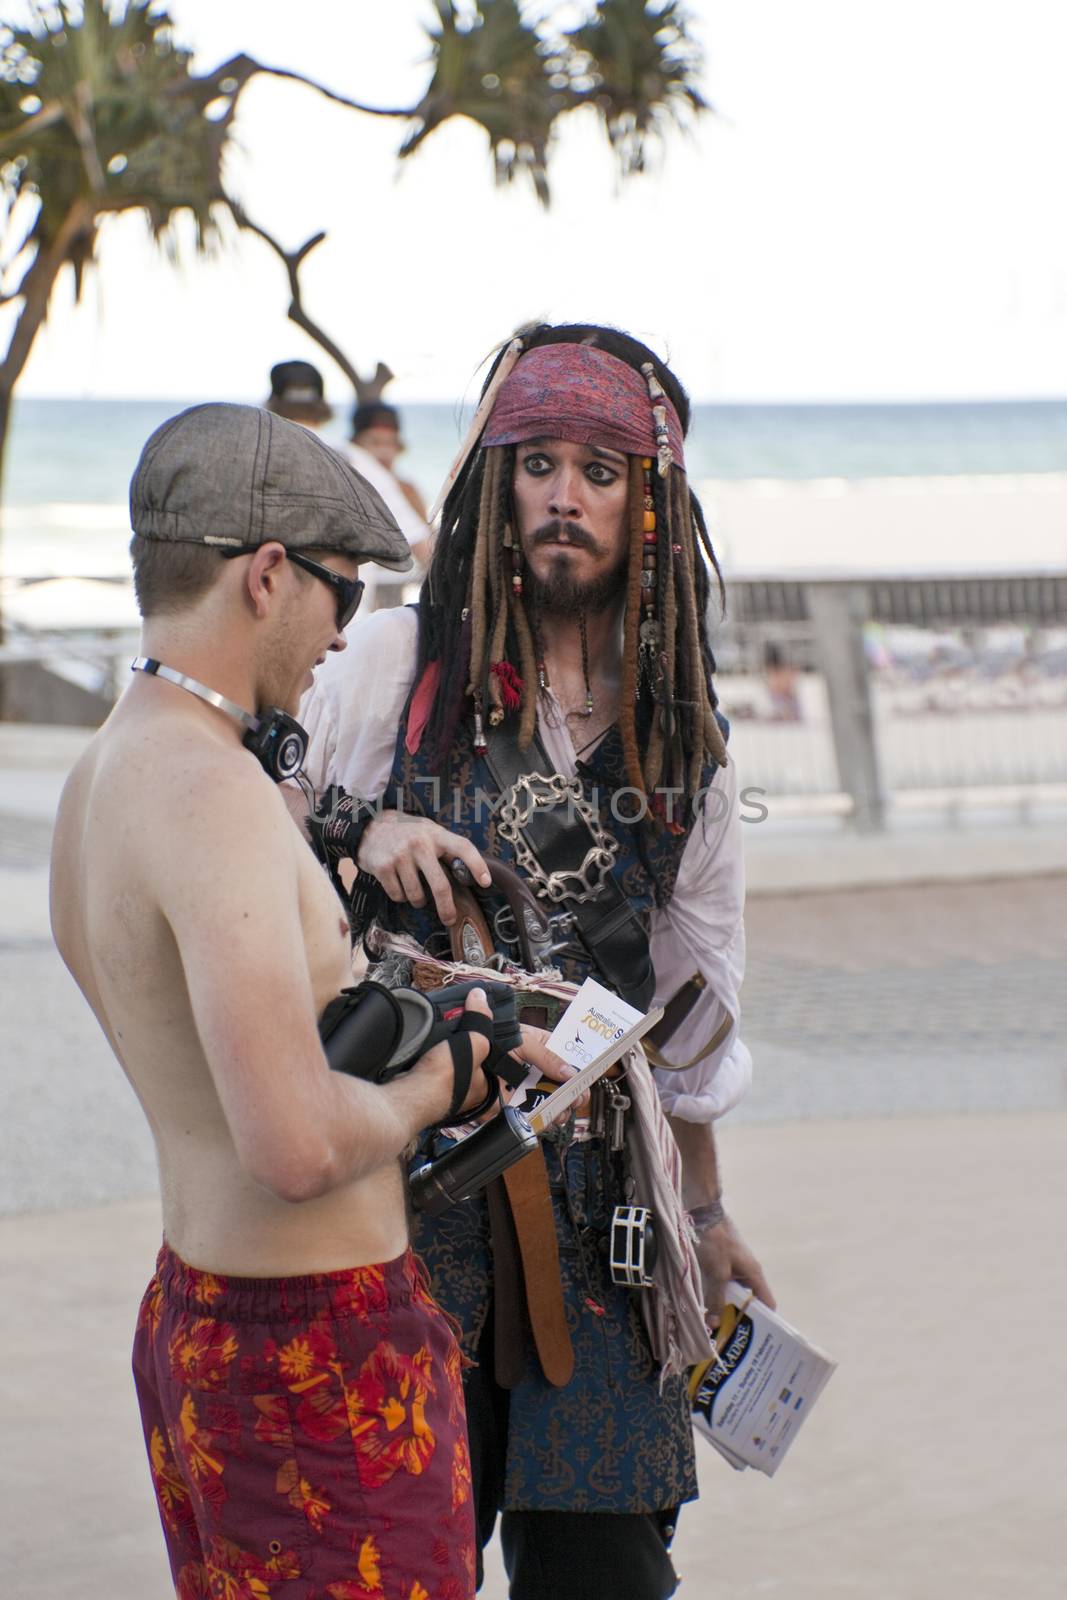 GOLD COAST - FEB 19: An unidentified man poses as Jack Sparrow from Pirates of the Caribbean movie franchise at an informal Weekend Market Feb.19, 2012 in Gold Coast Australia.